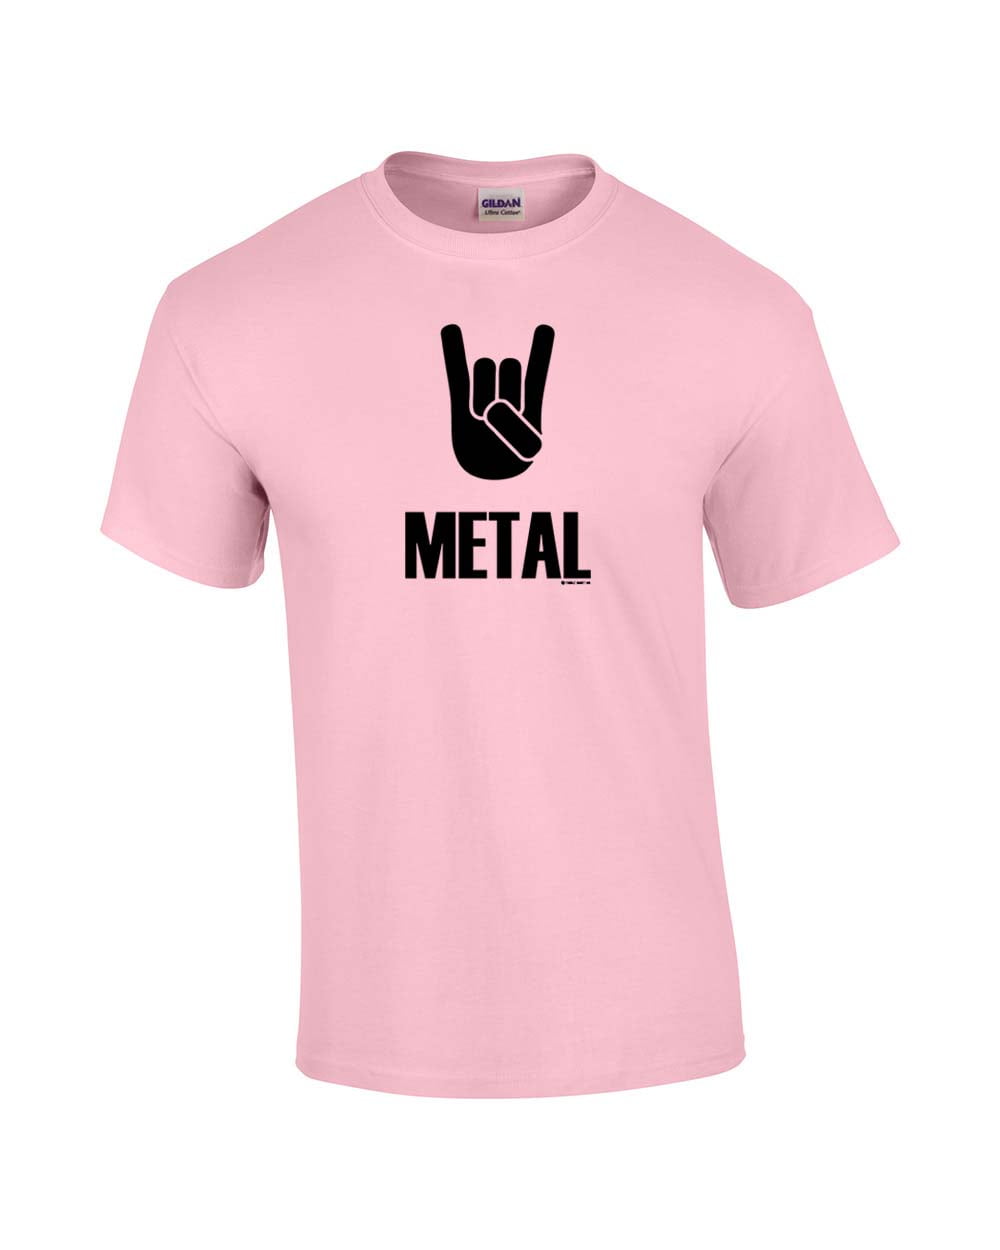 This is my Metal Shirt Mens Tee Shirt Pick Size Color Small-6XL 